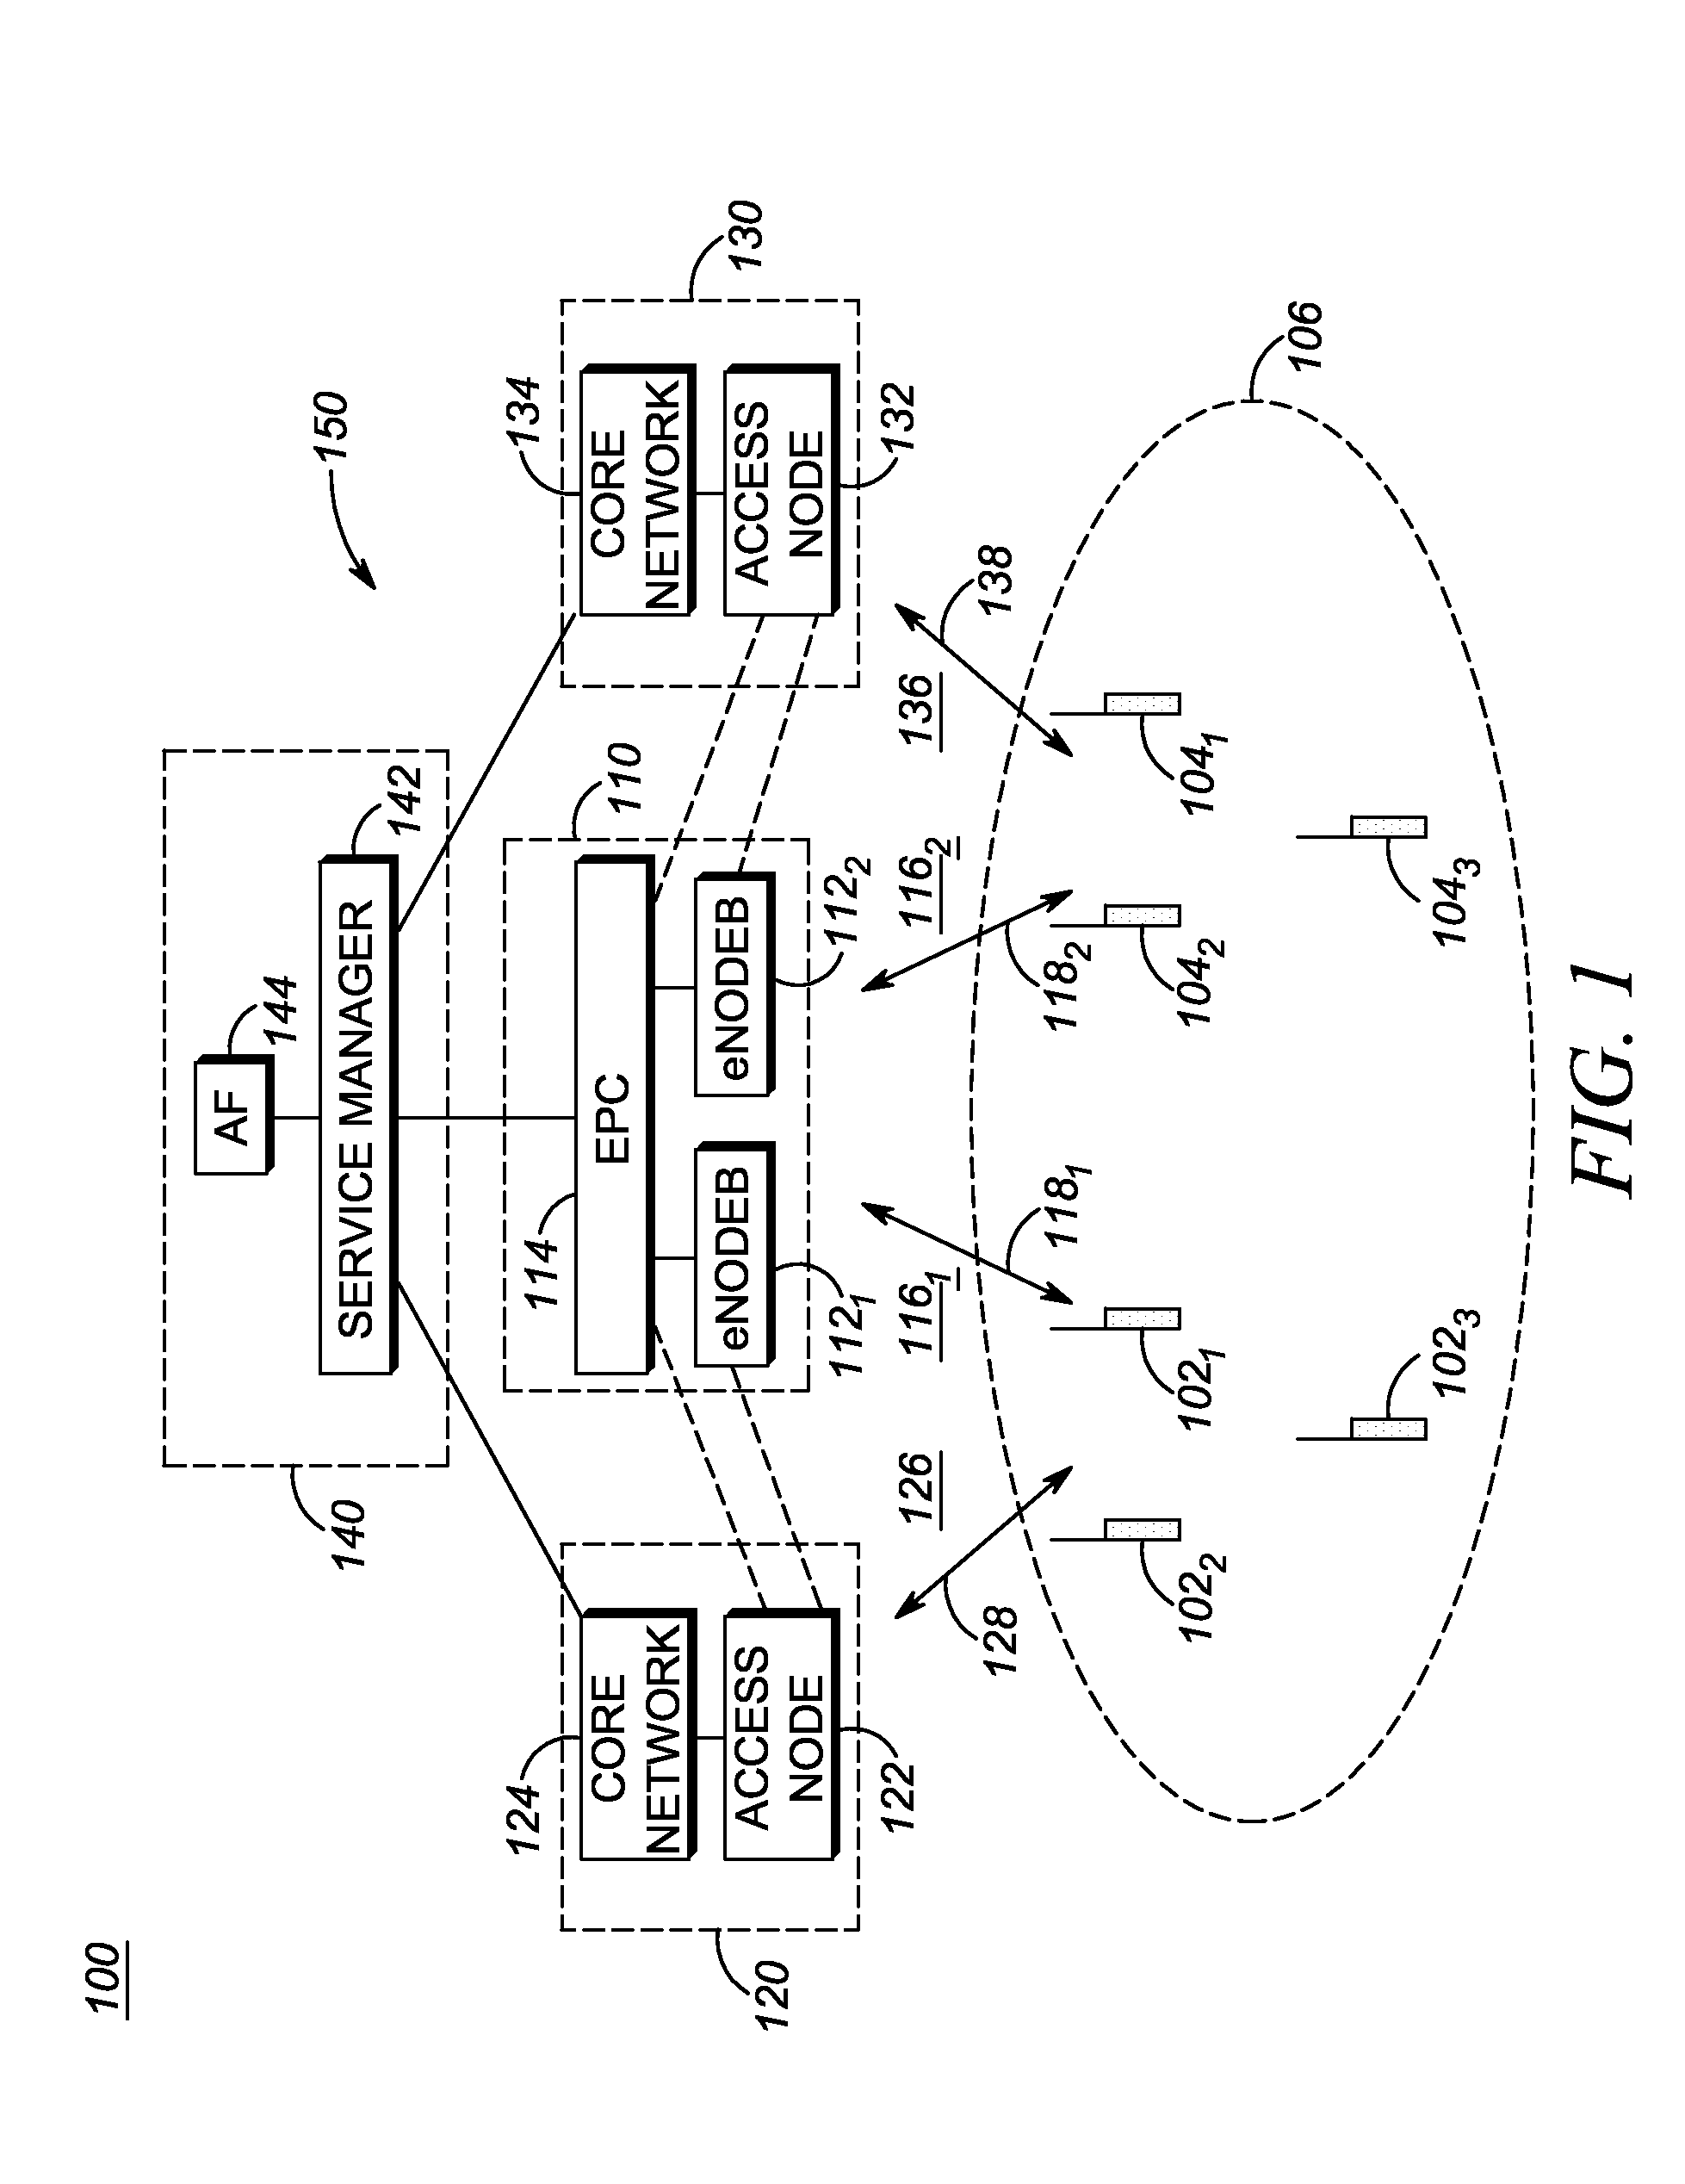 Method and apparatus for traffic offloading procedure management in a public safety communication system